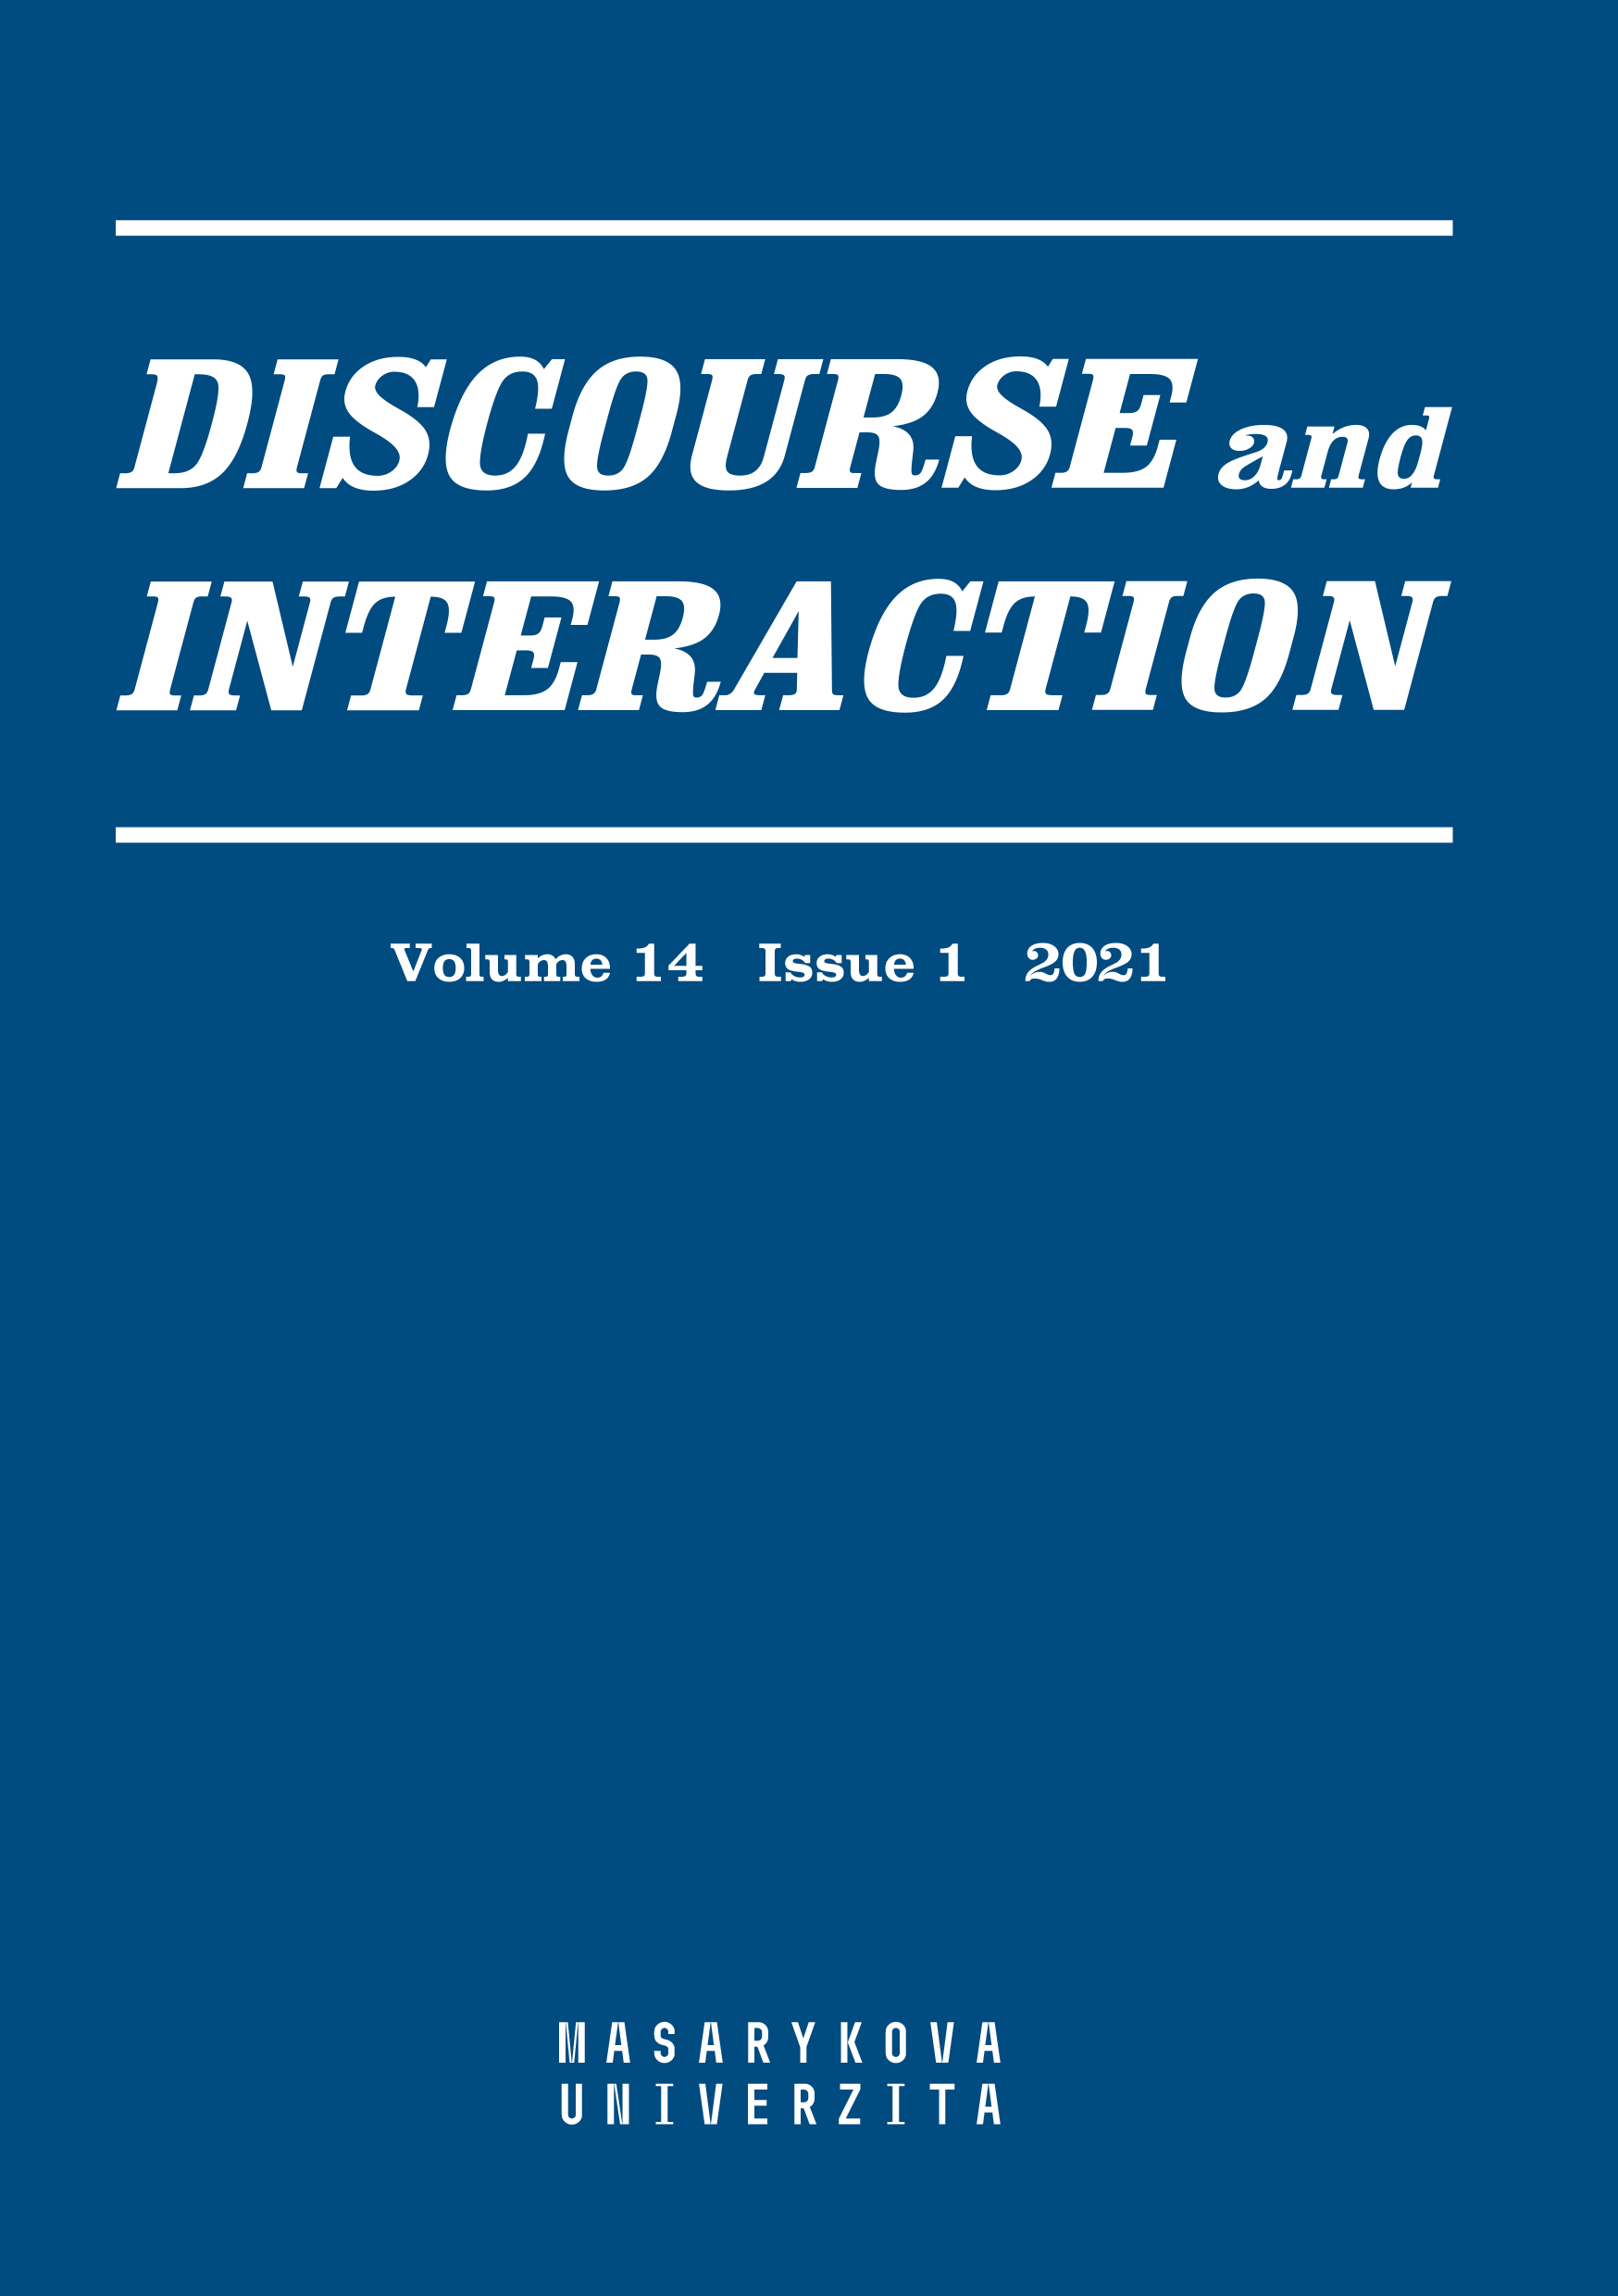 Interpersonality in research article abstracts: A diachronic case study Cover Image